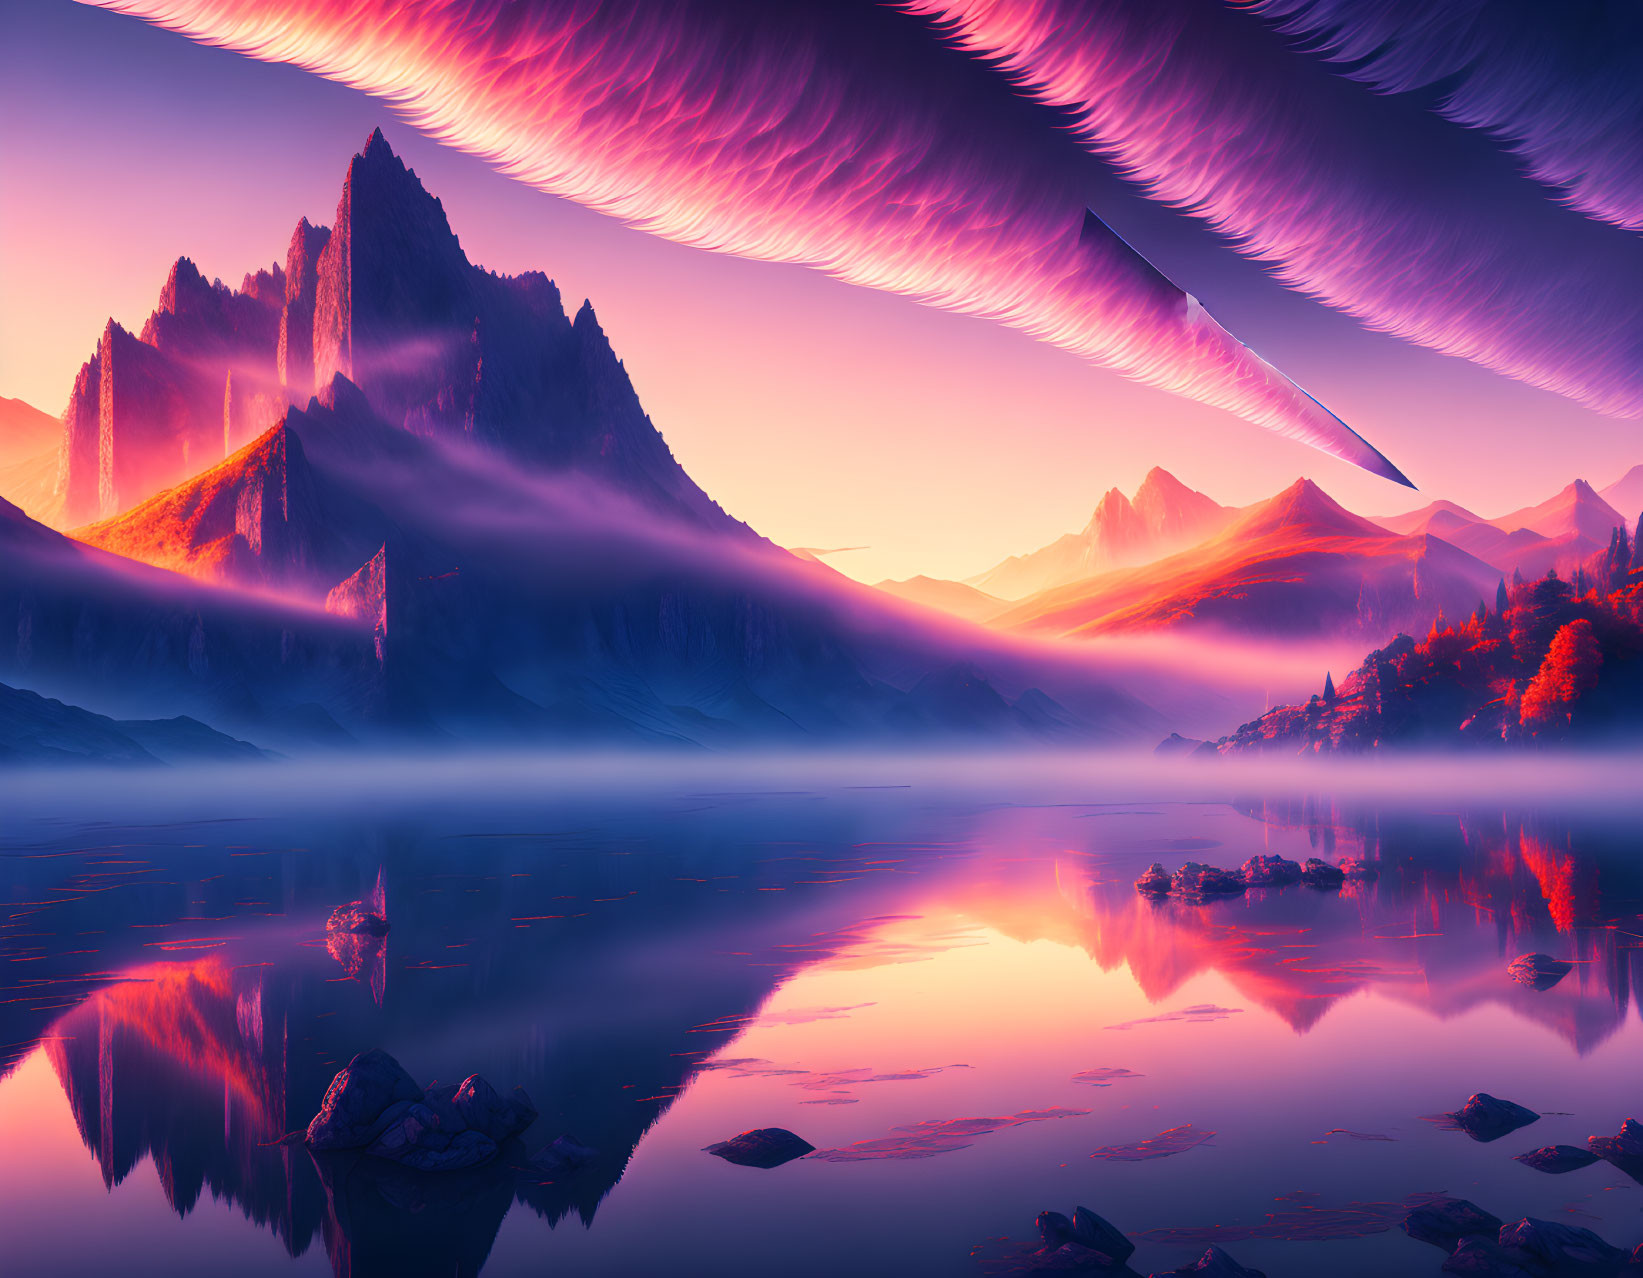 Surreal landscape with reflective lake and towering mountains